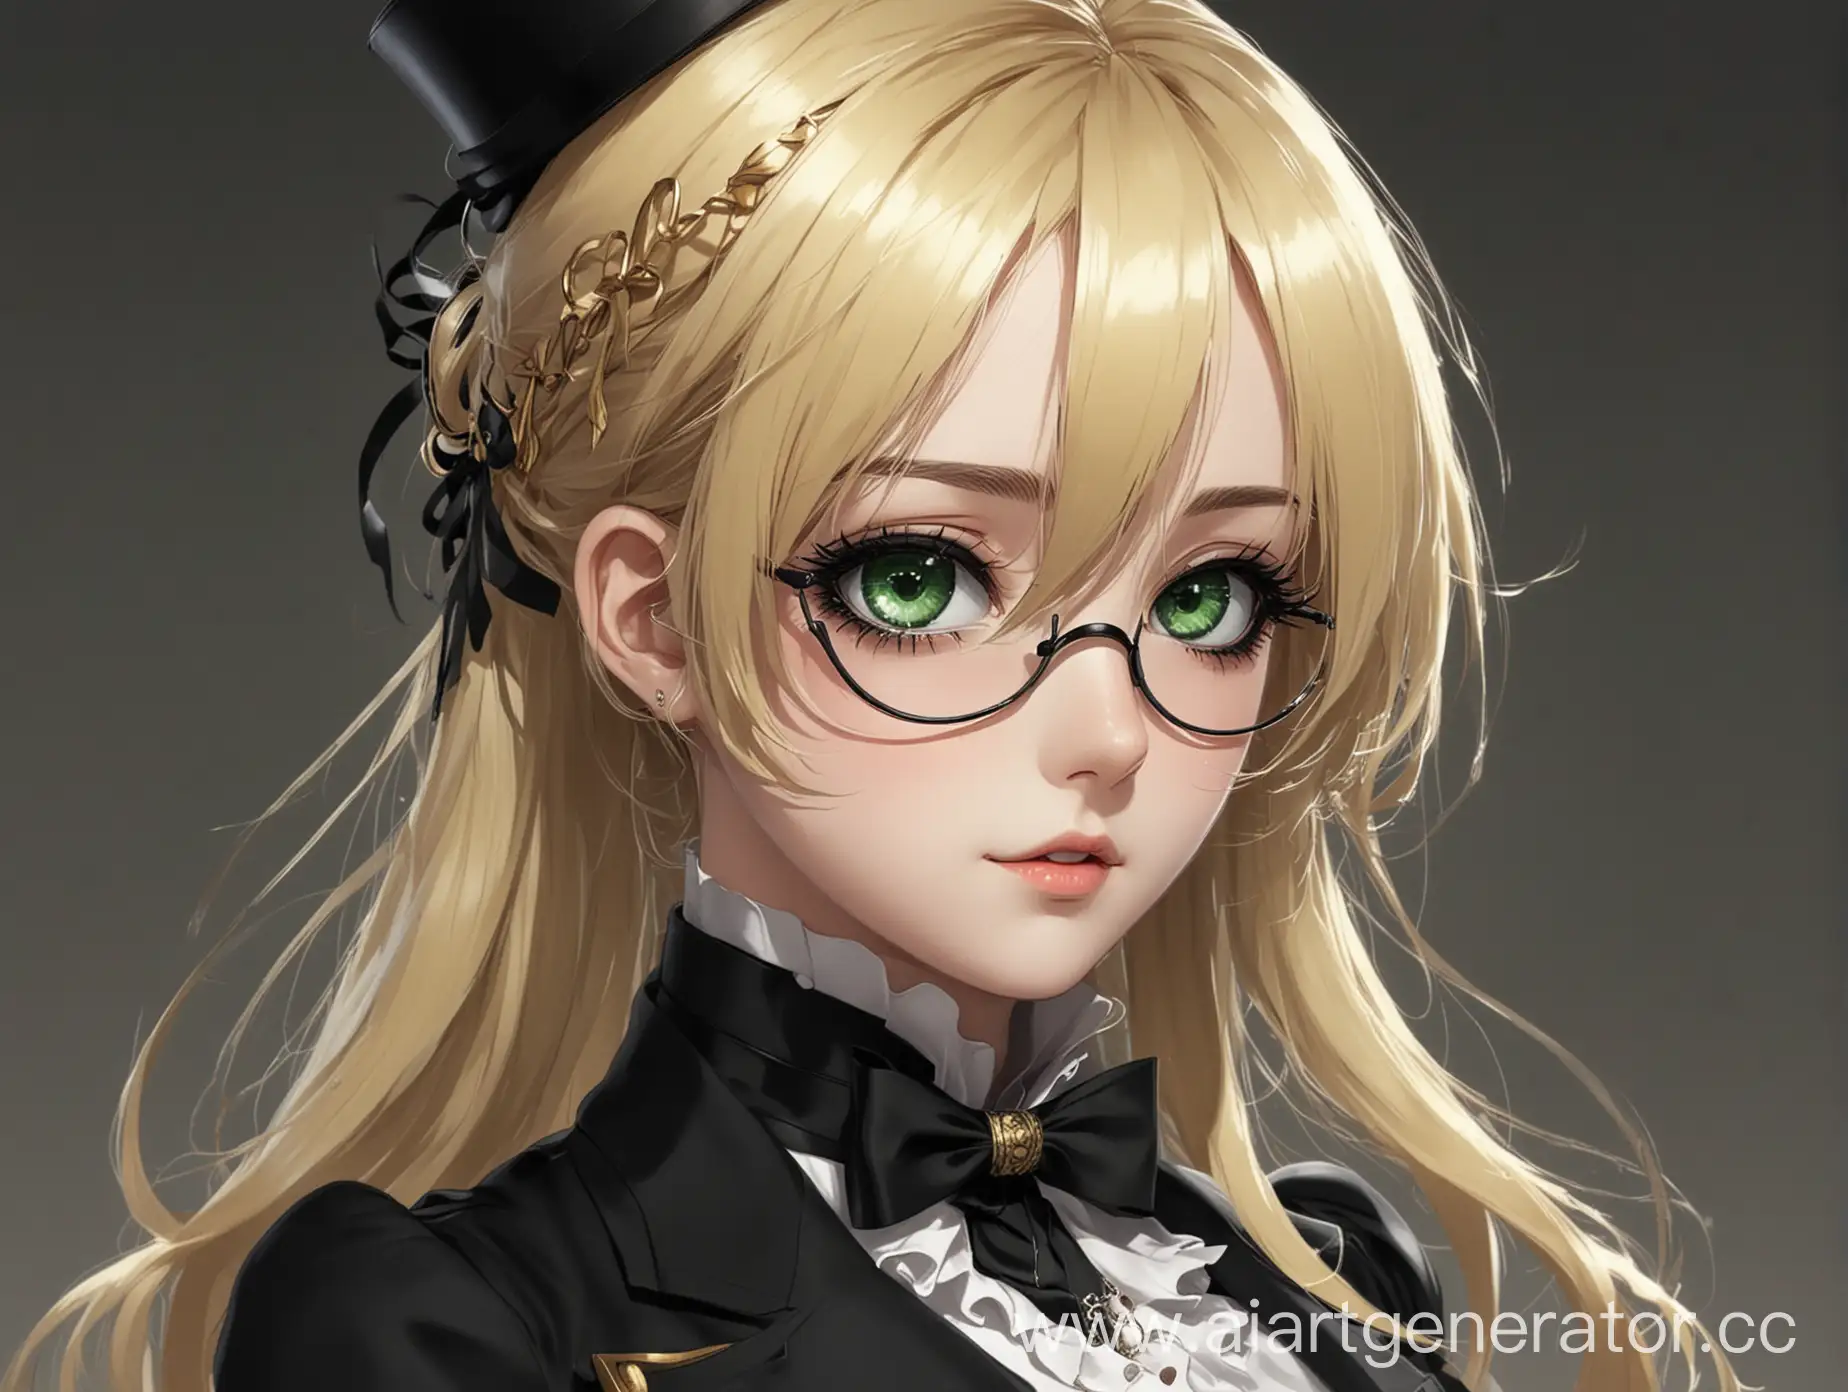 Blonde-Aristocratic-Anime-Character-in-Black-Gothic-Suit-with-Monocle